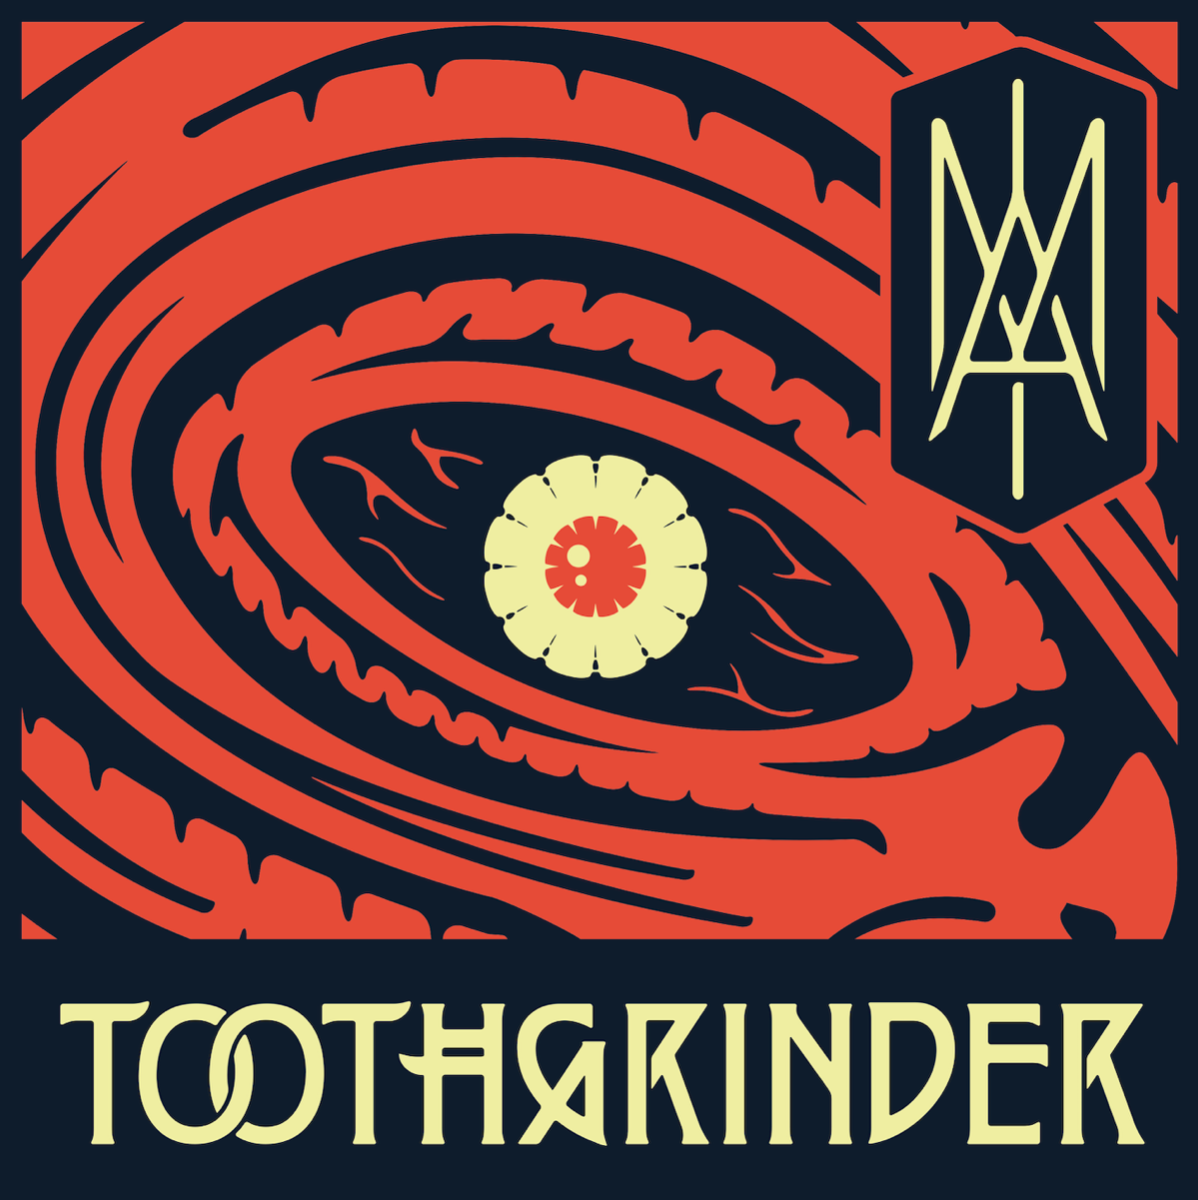 Toothgrinder Are Back With New Album "I AM" + Debut Video For Title Track